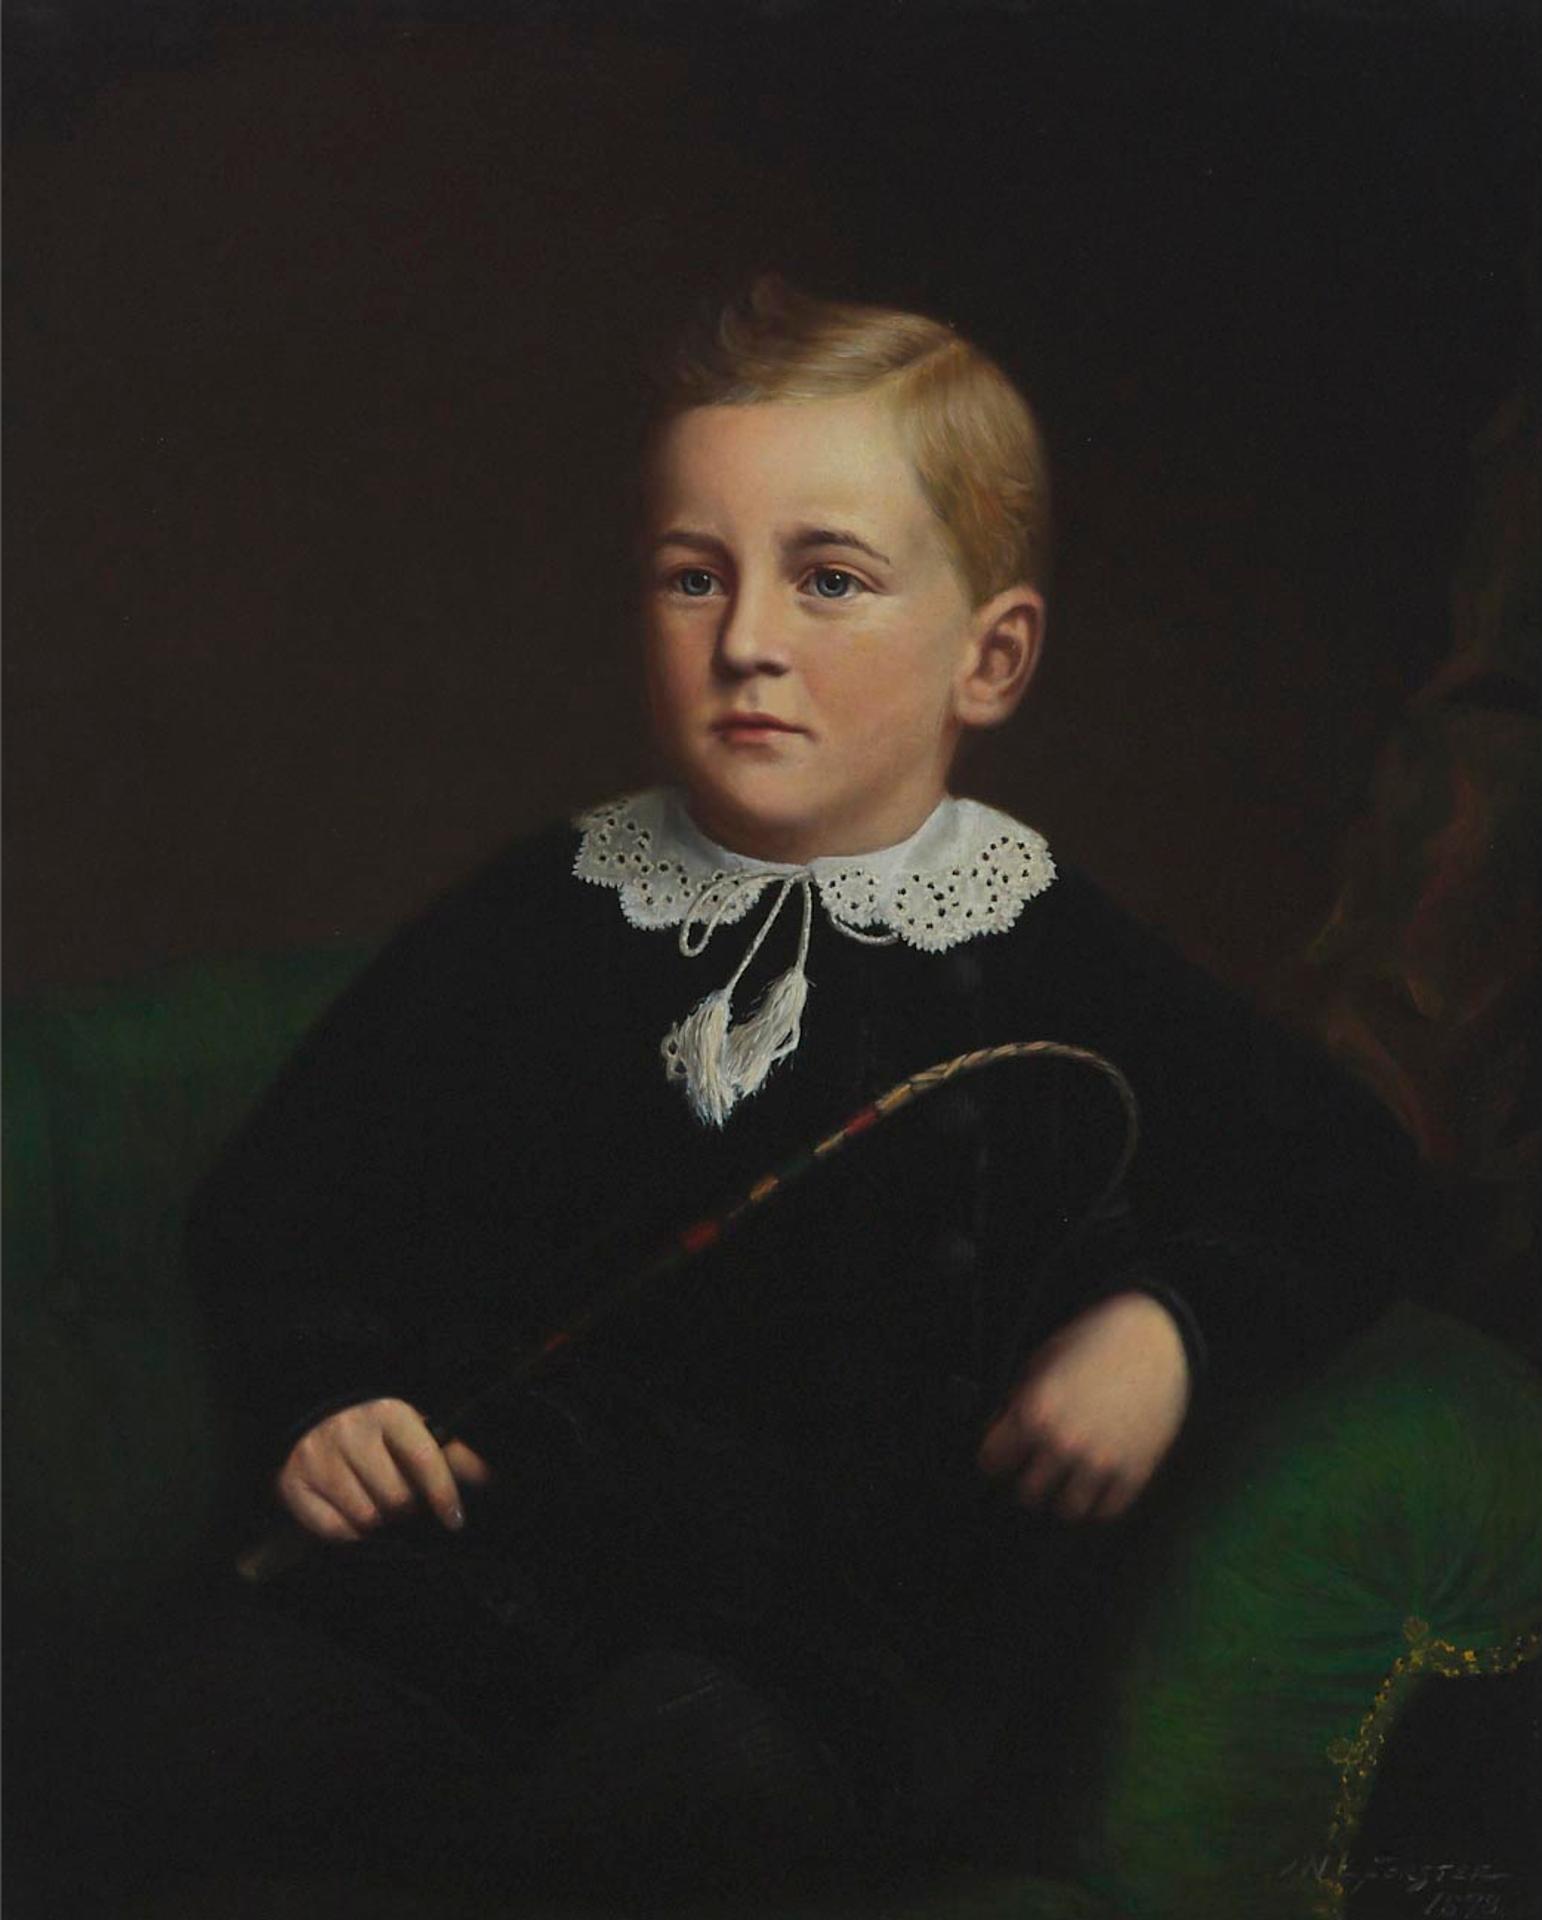 John Wycliffe Lowes Forster (1850-1938) - Portrait Of A Young Boy, 1878